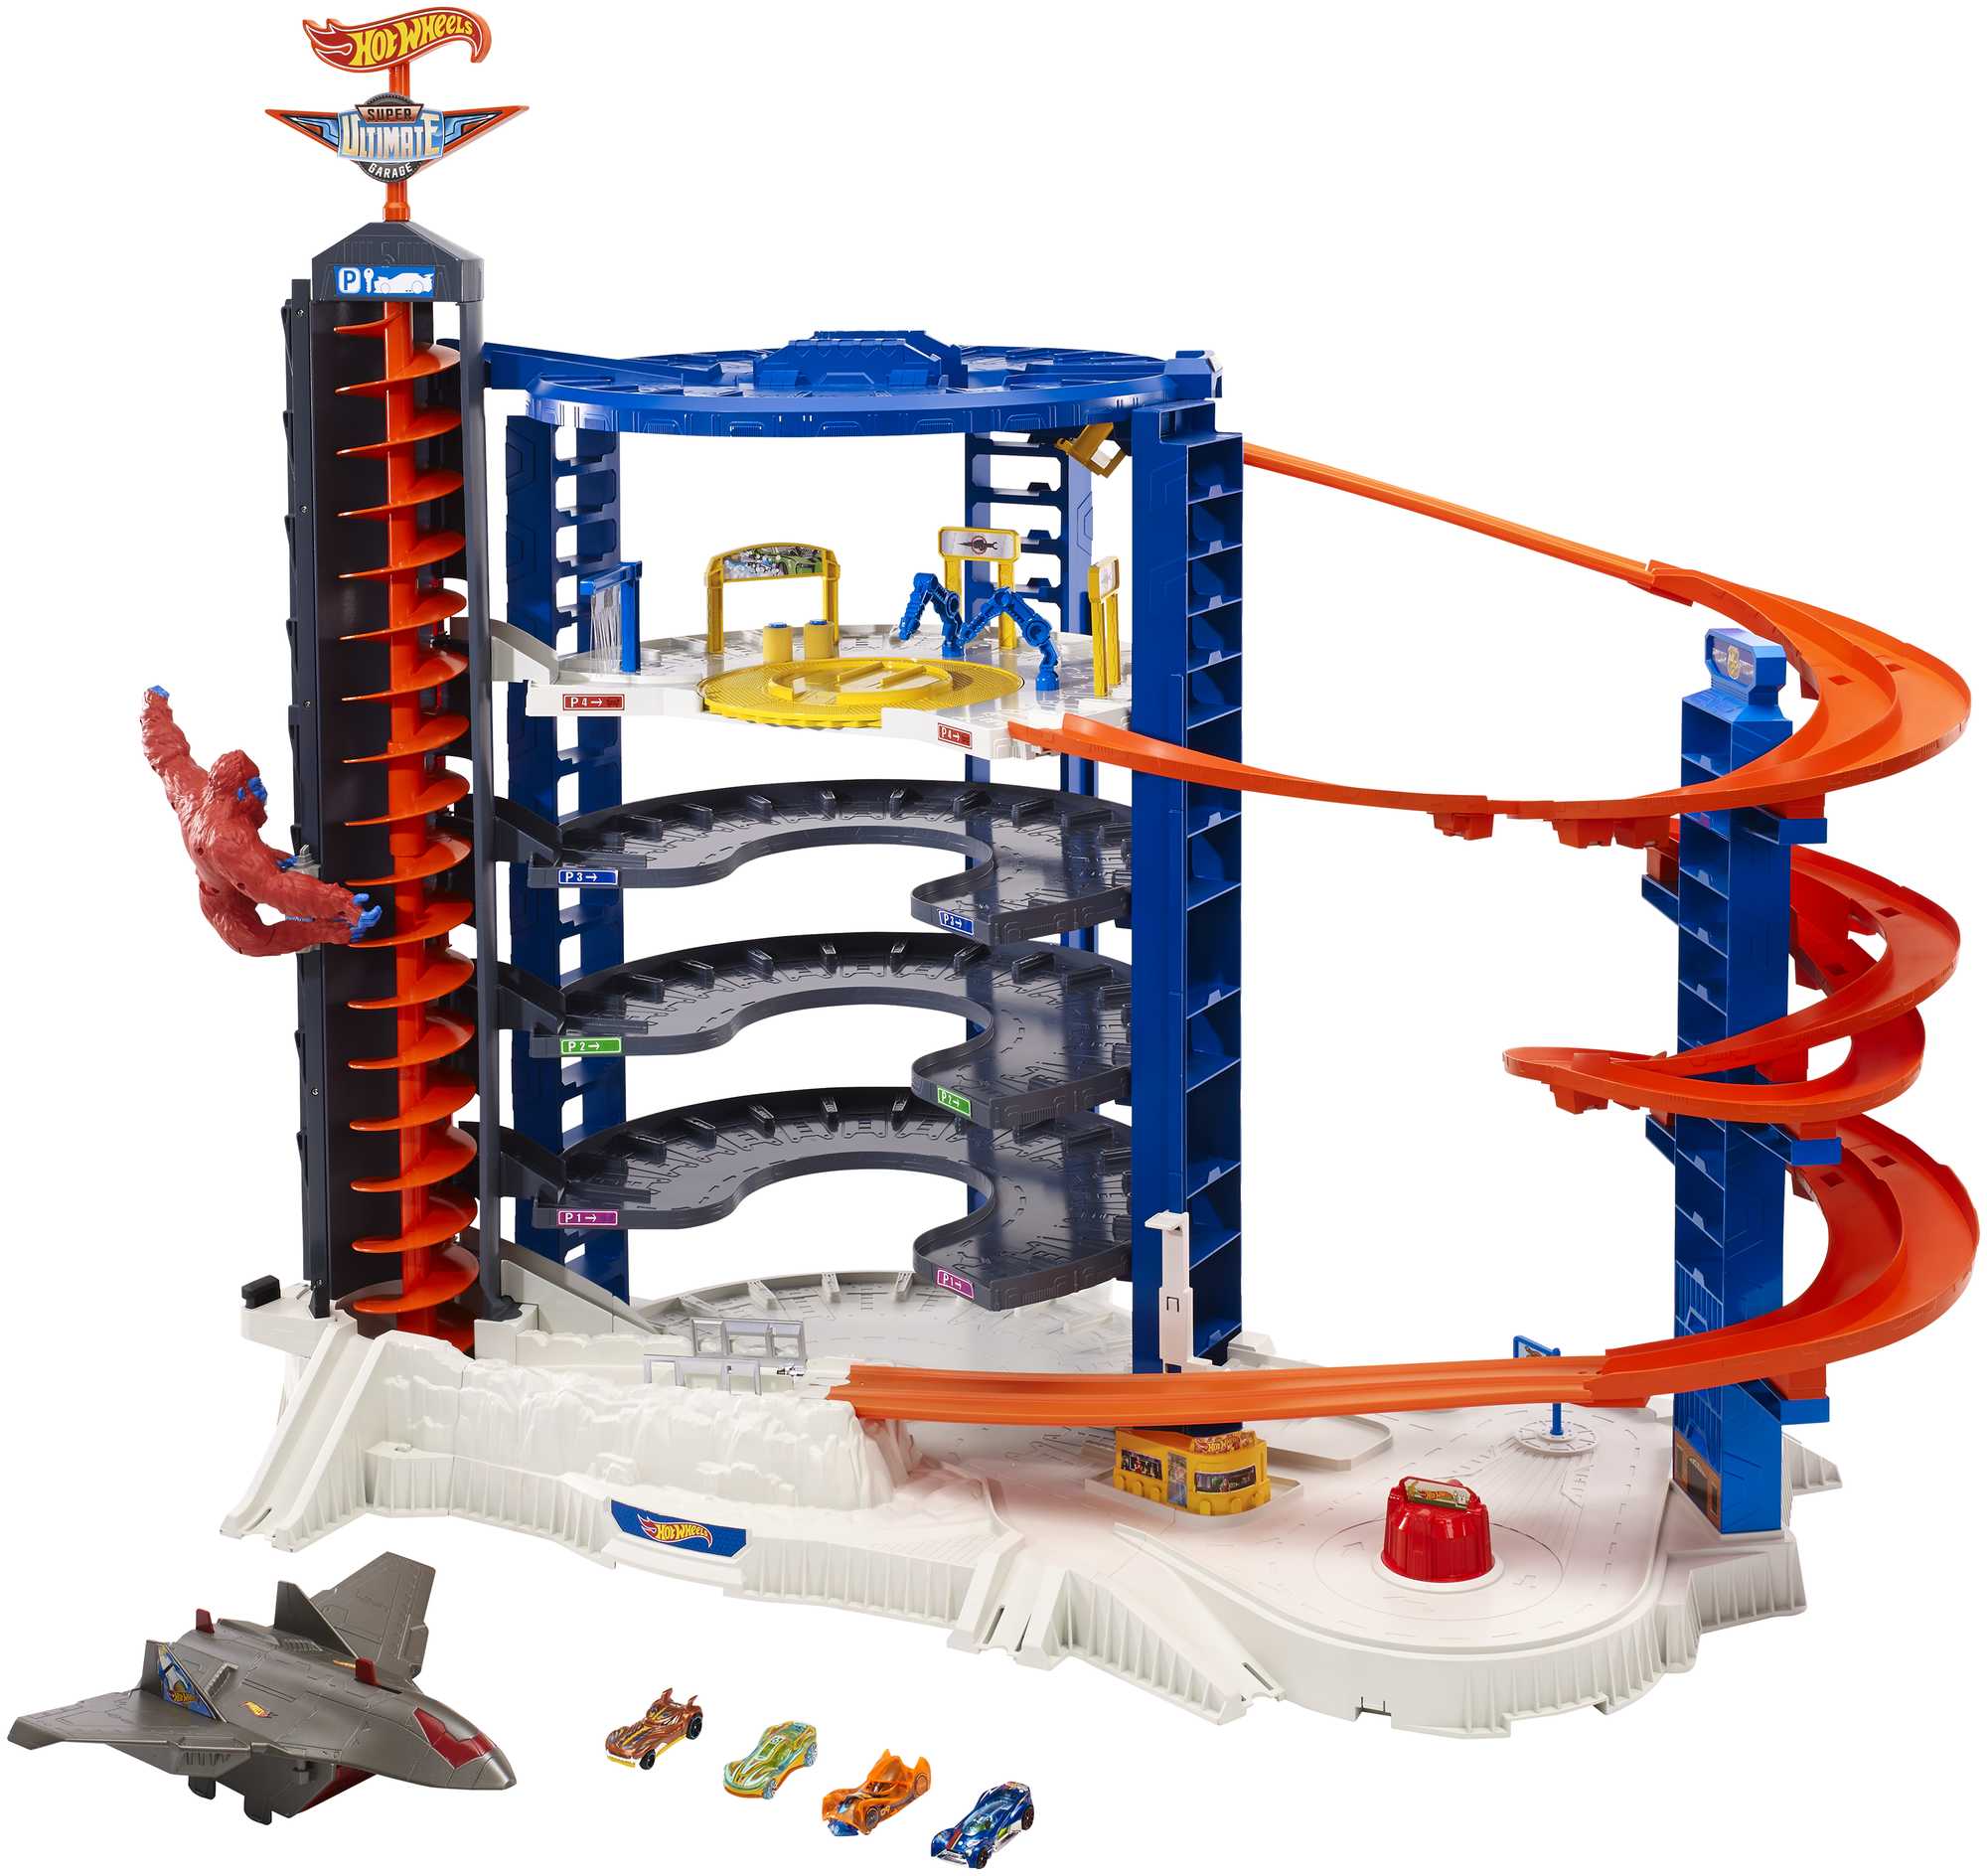 Hot Wheels Ultimate Garage Track Set with 2 Toy Cars, Hot Wheels City  Playset with Multi-Level Side-by-Side Racetrack, Moving T-Rex Dino & Hot  Wheels